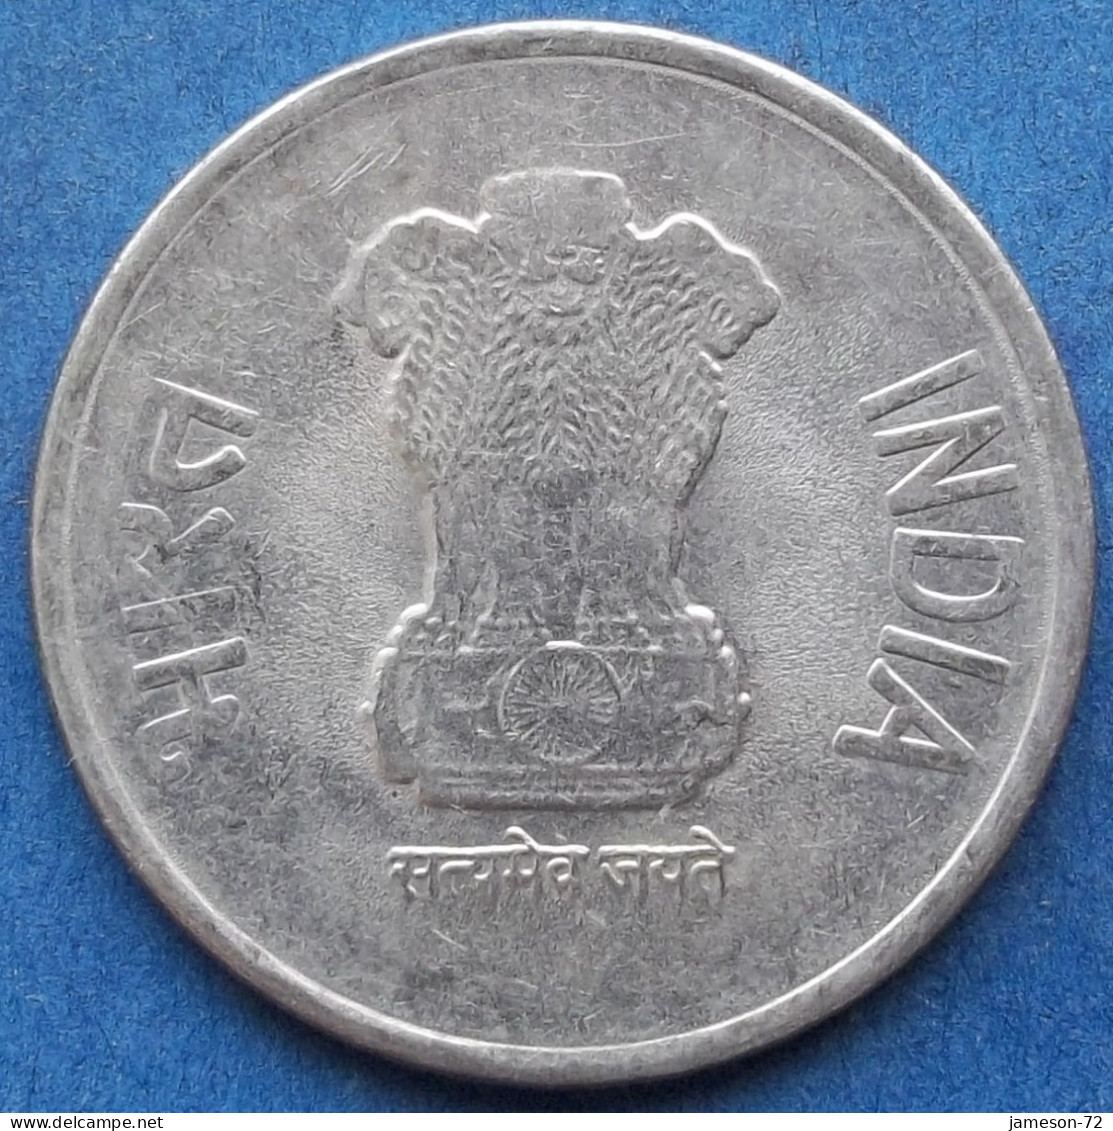 INDIA - 2 Rupees 2019 "Lotus Flowers" KM# 395 Republic Decimal Coinage (1957) - Edelweiss Coins - Georgië